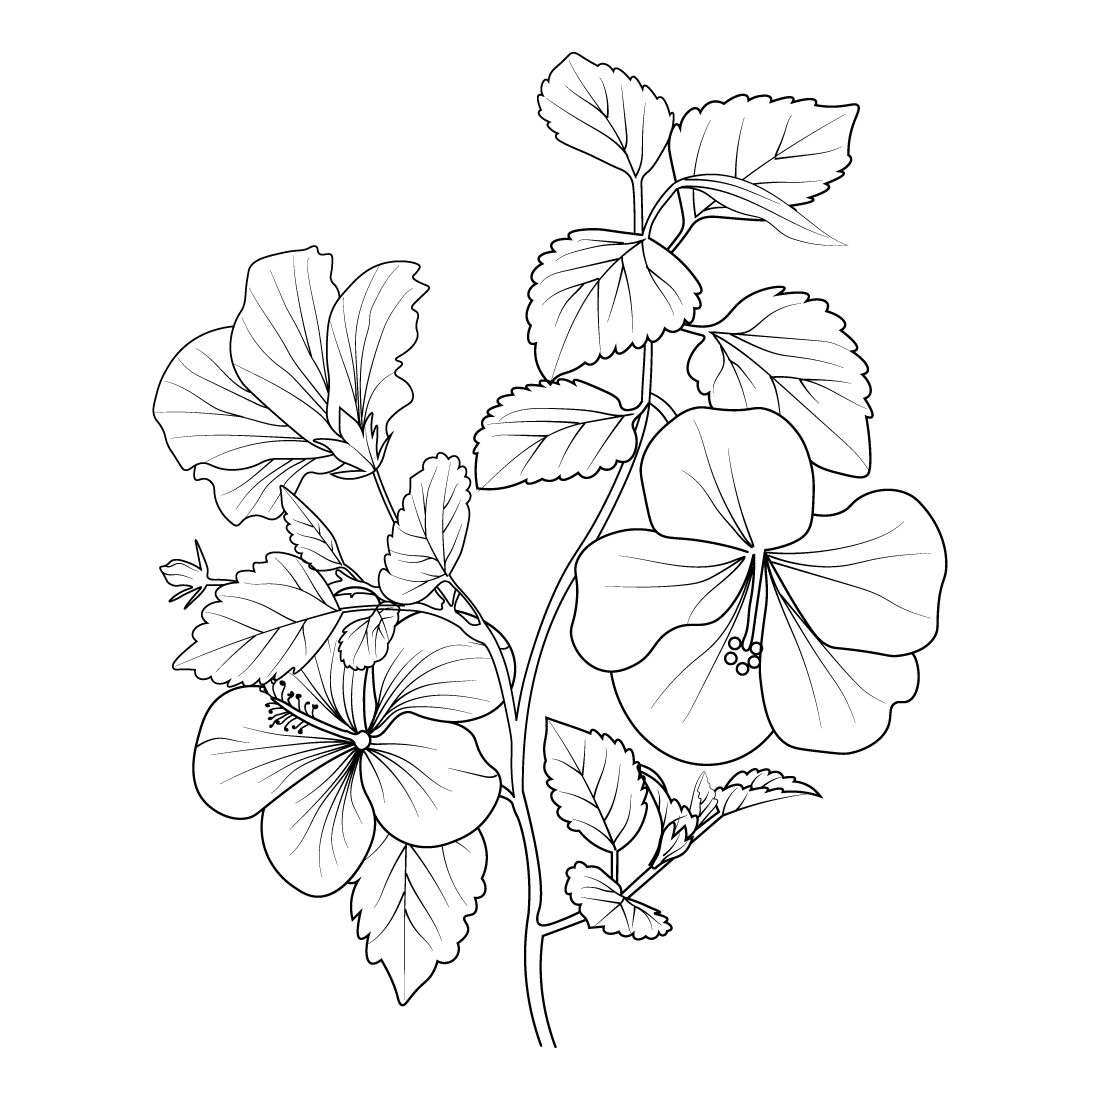 Flower coloring page and books, hand-drawn monochrome vector sketch hibiscus flower, preview image.